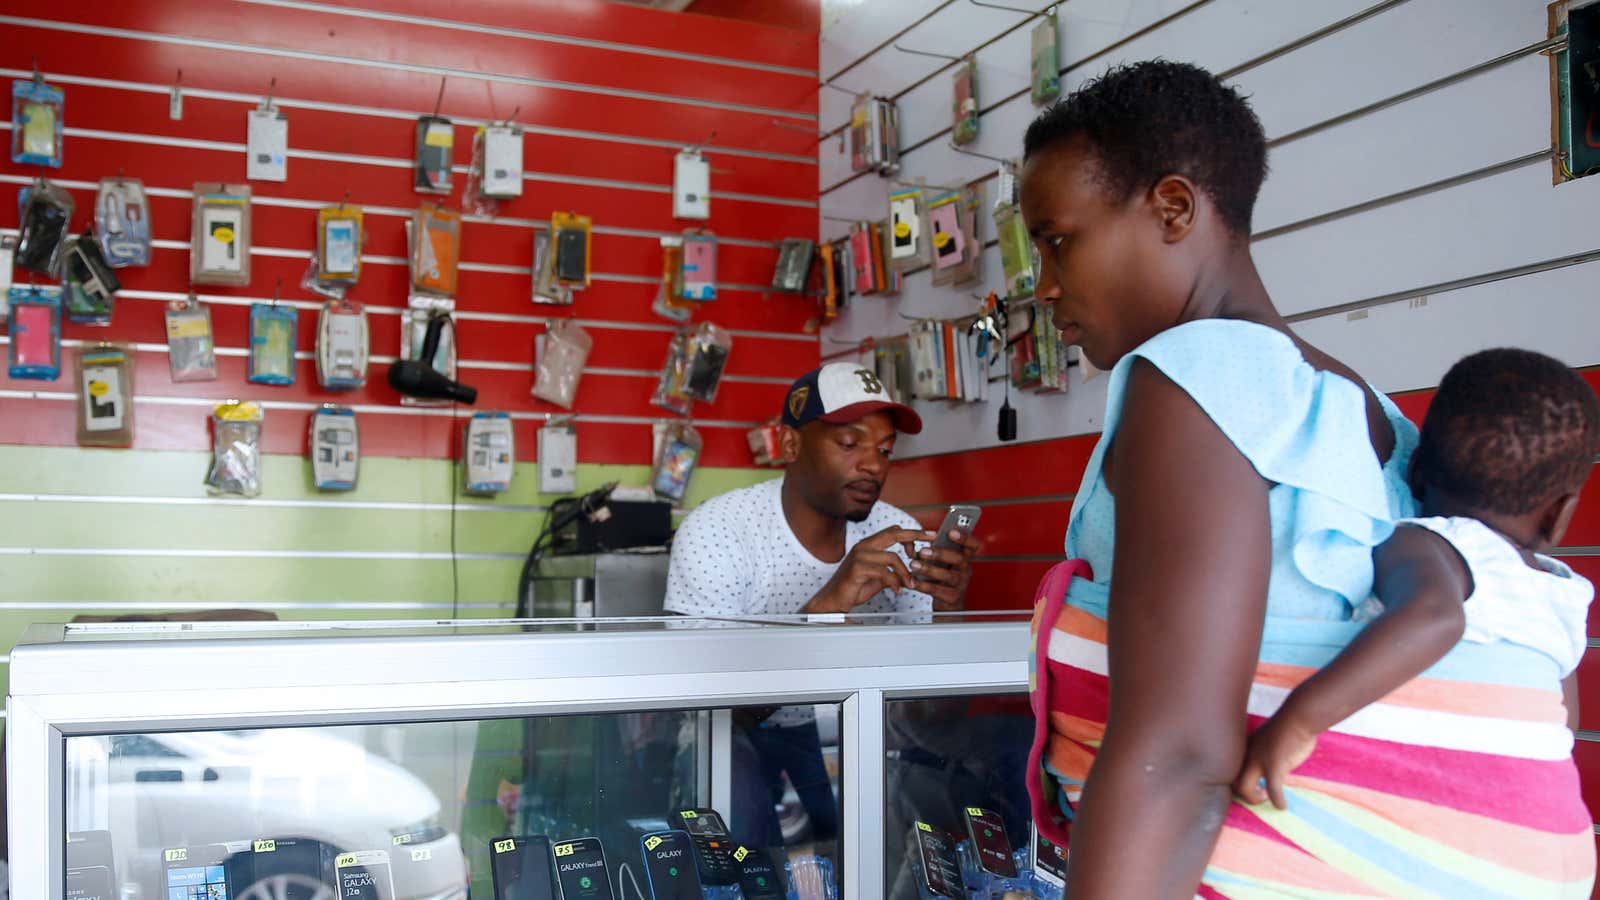 A woman looks at mobile phones at a shop in central Harare, Zimbabwe, December 12, 2017.